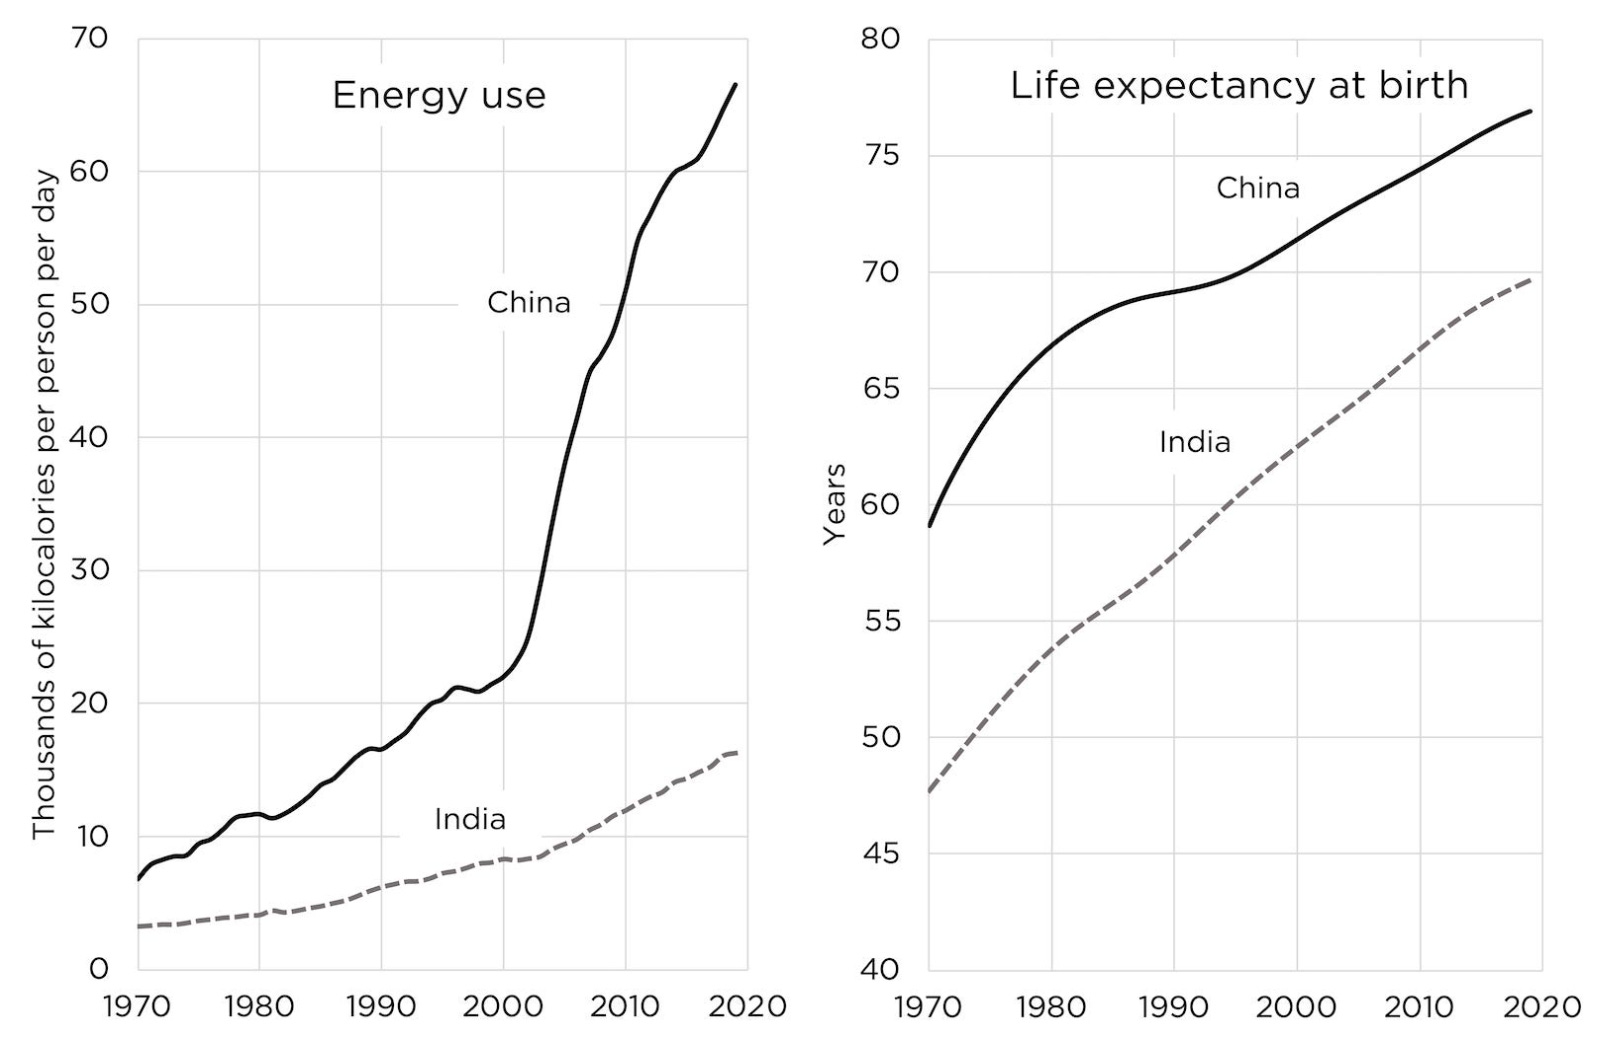 IMAGE 6 - Energy use & Life expectancy at birth